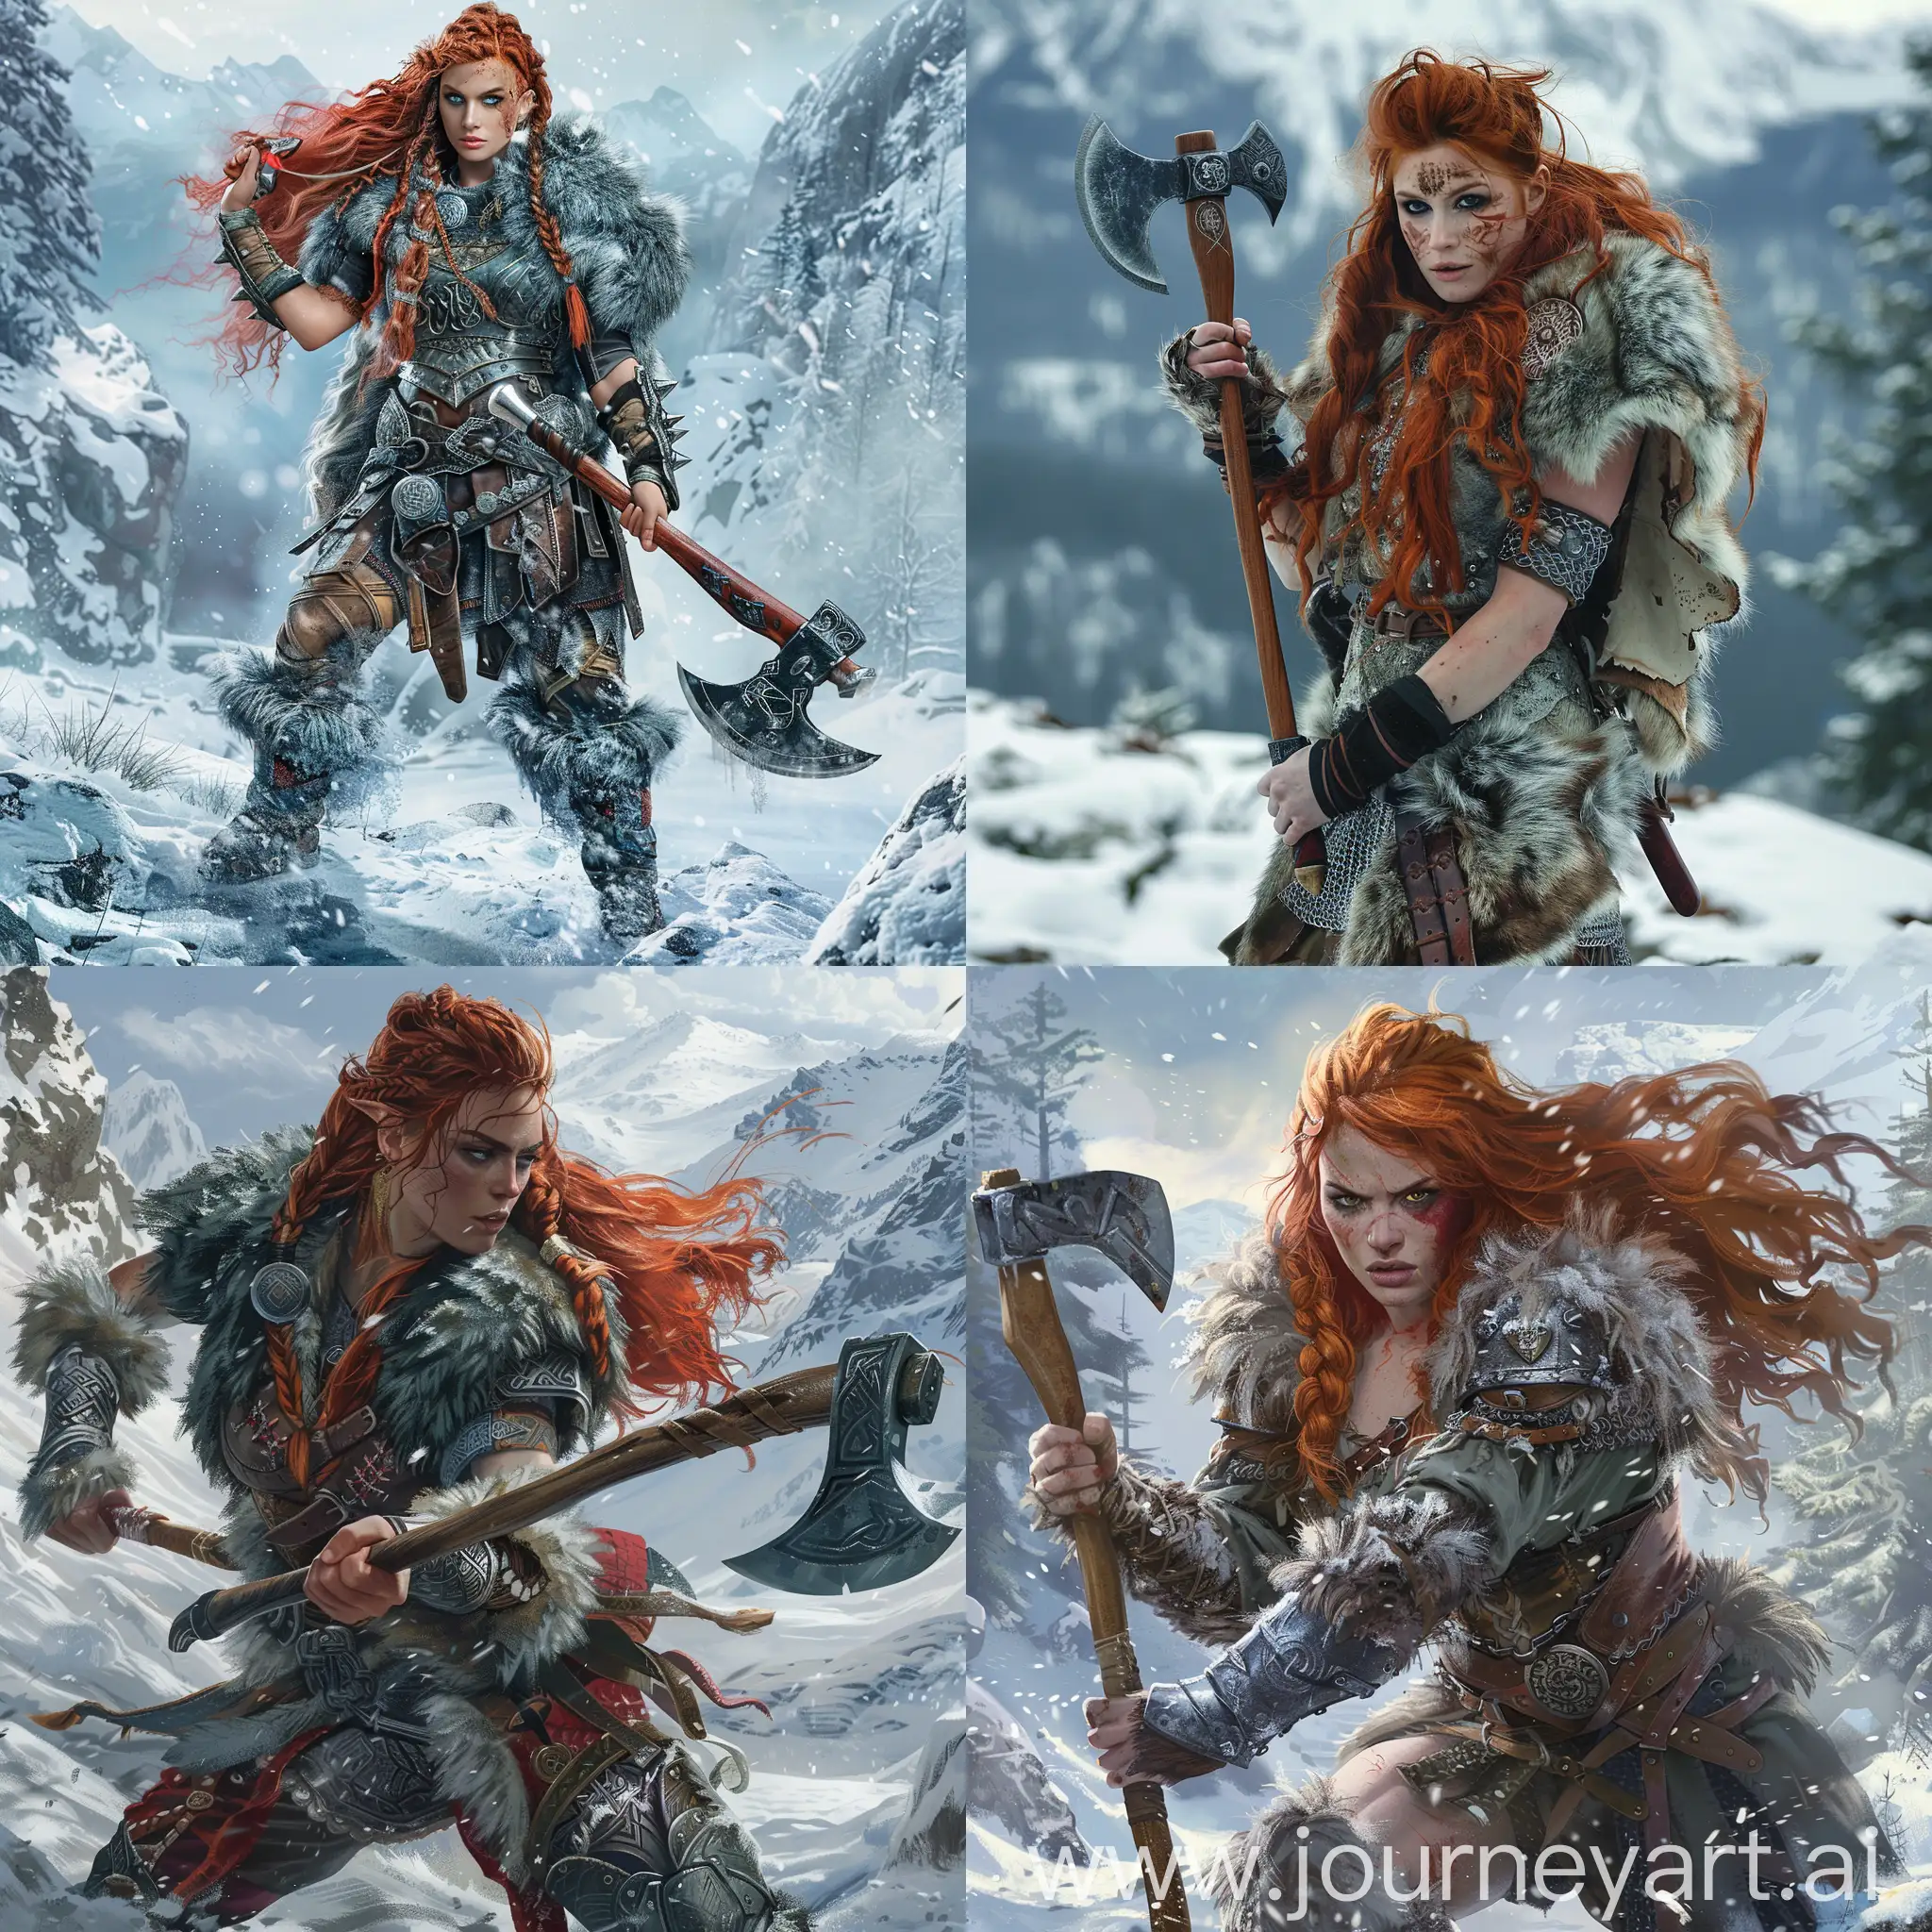 RedHaired-Viking-Woman-in-Snowy-Mountain-Terrain-with-Axe